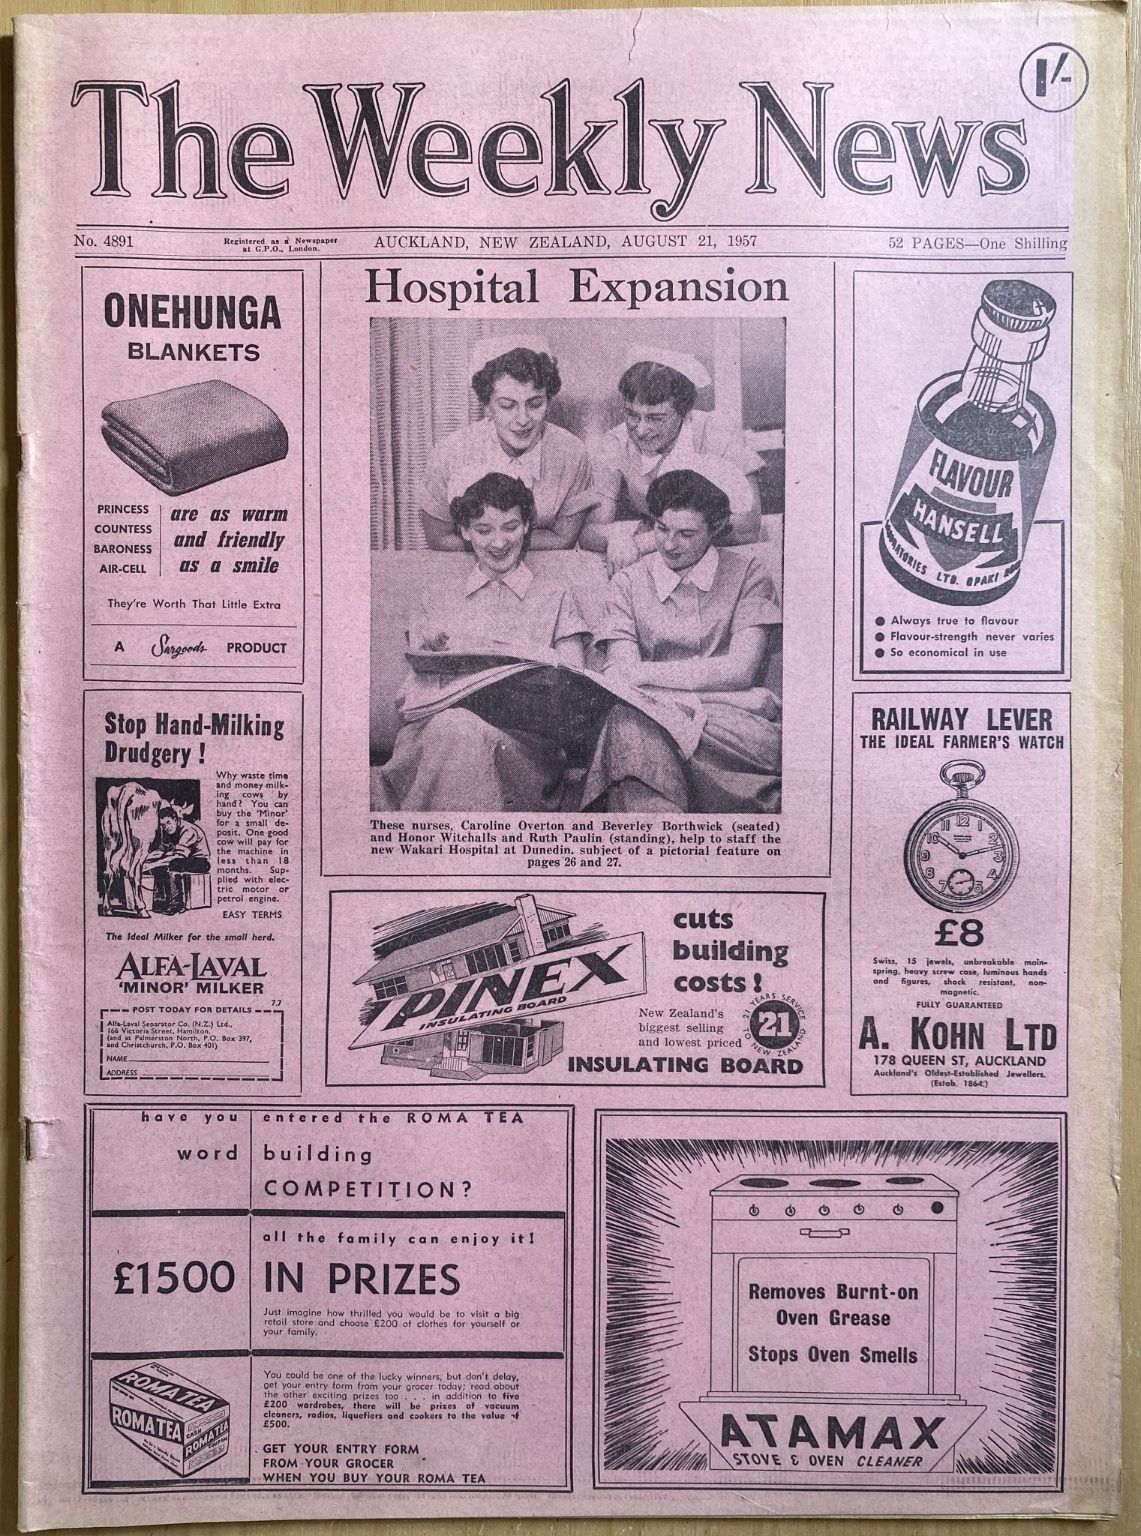 OLD NEWSPAPER: The Weekly News, No. 4891, 21 August 1957